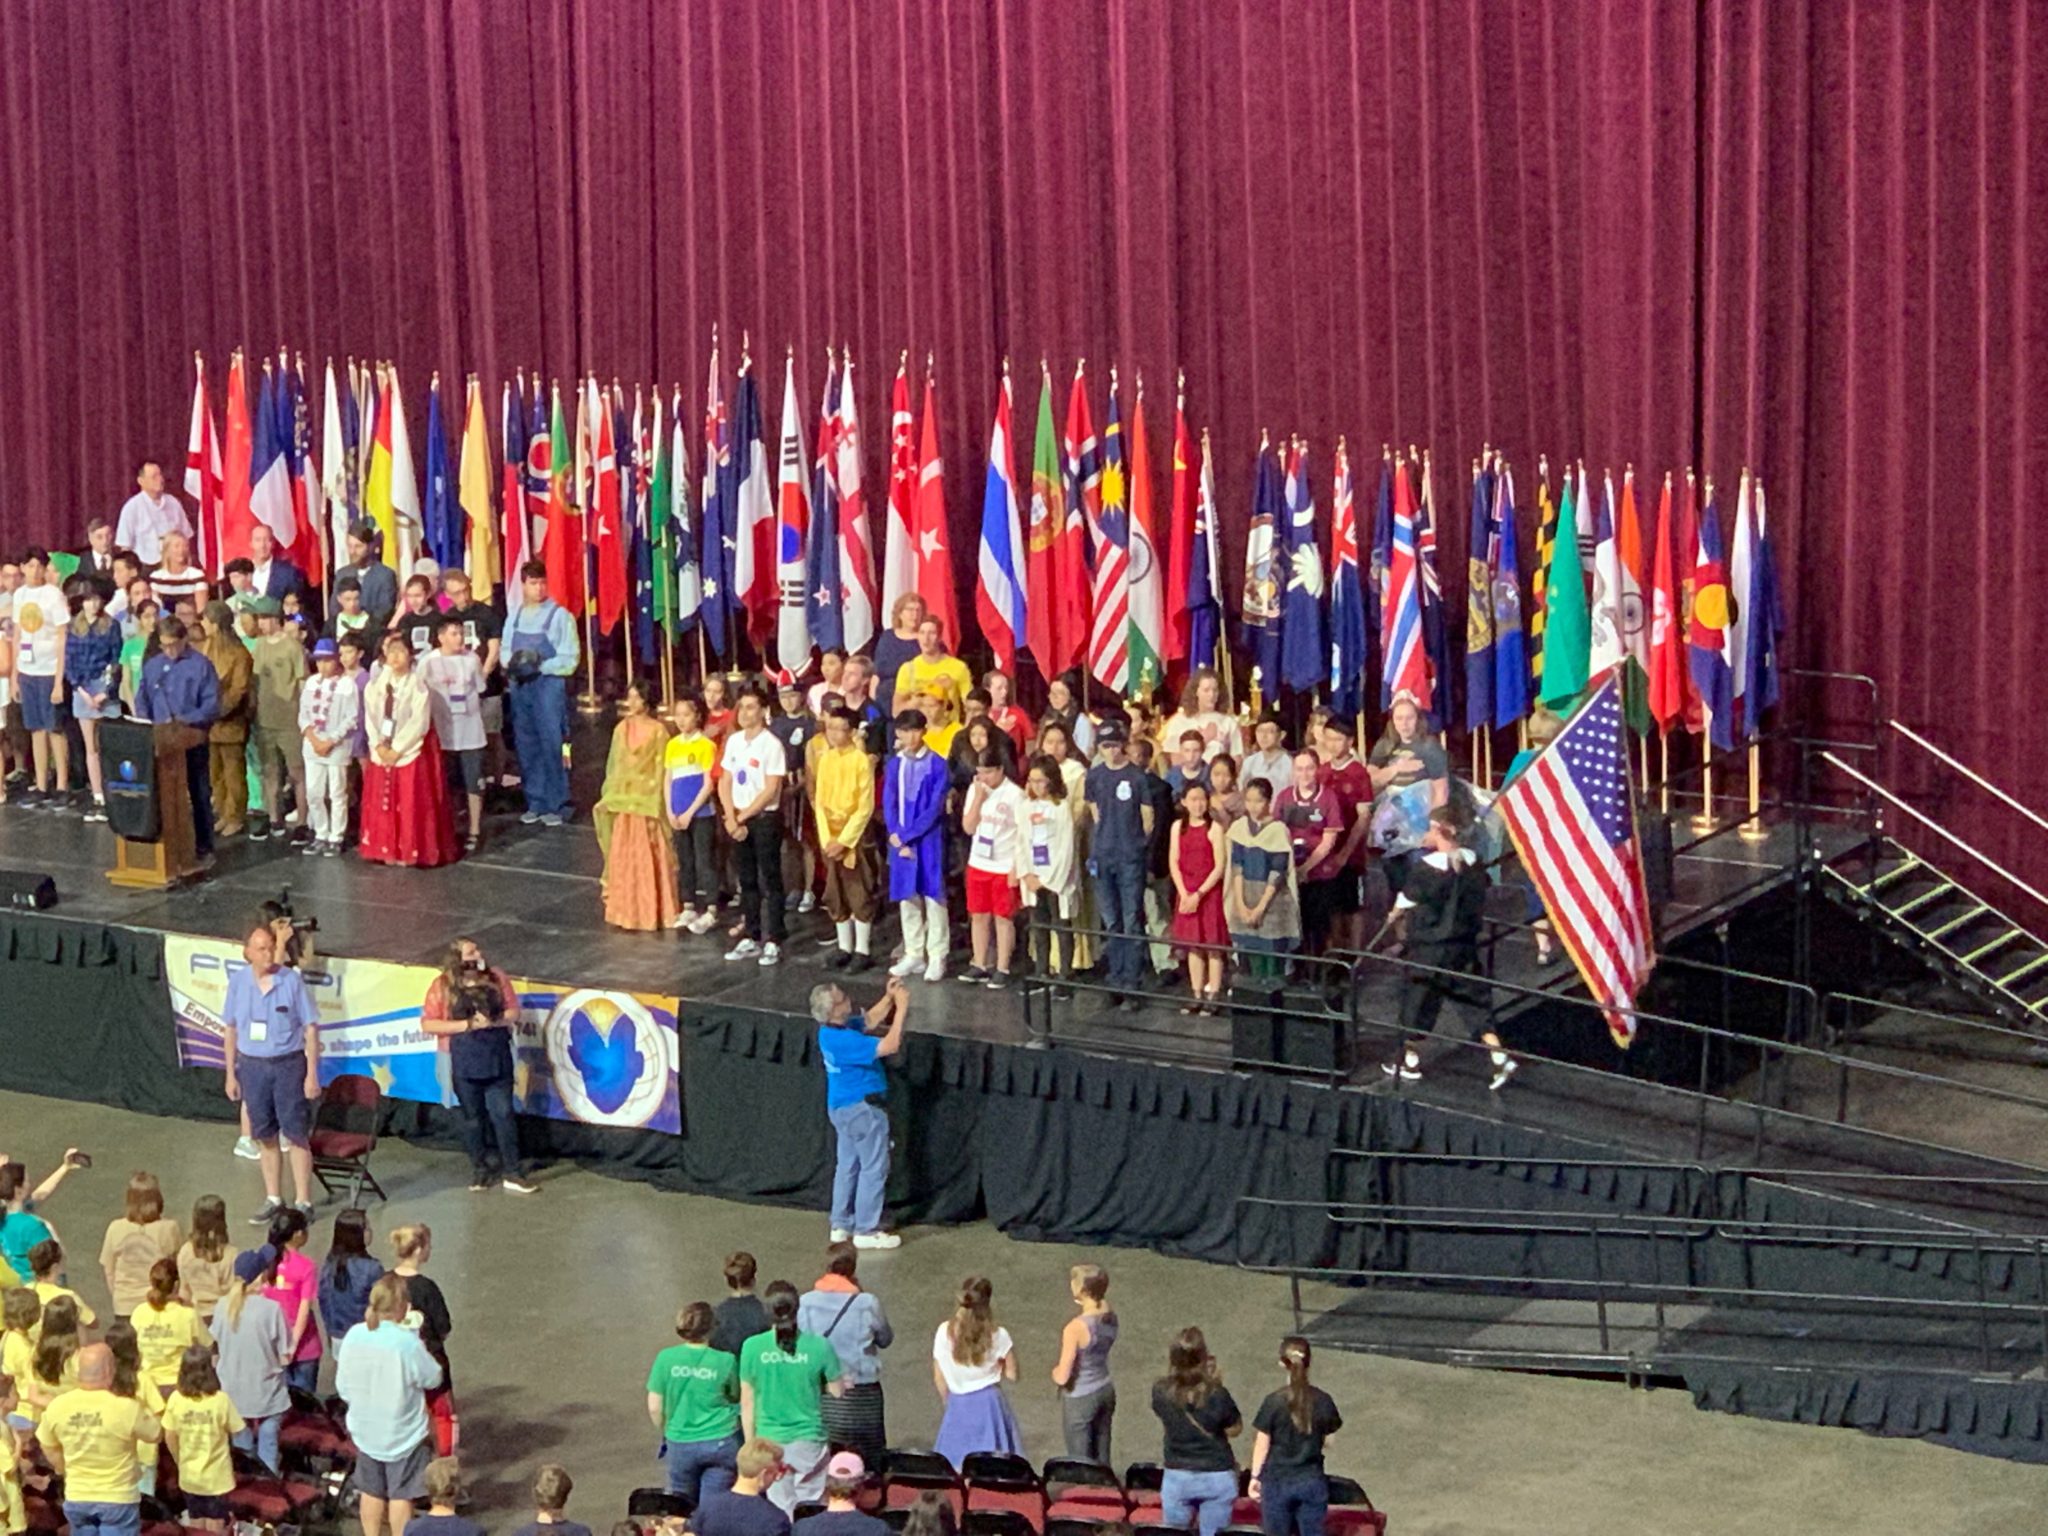 Celebration of flags on the stage.